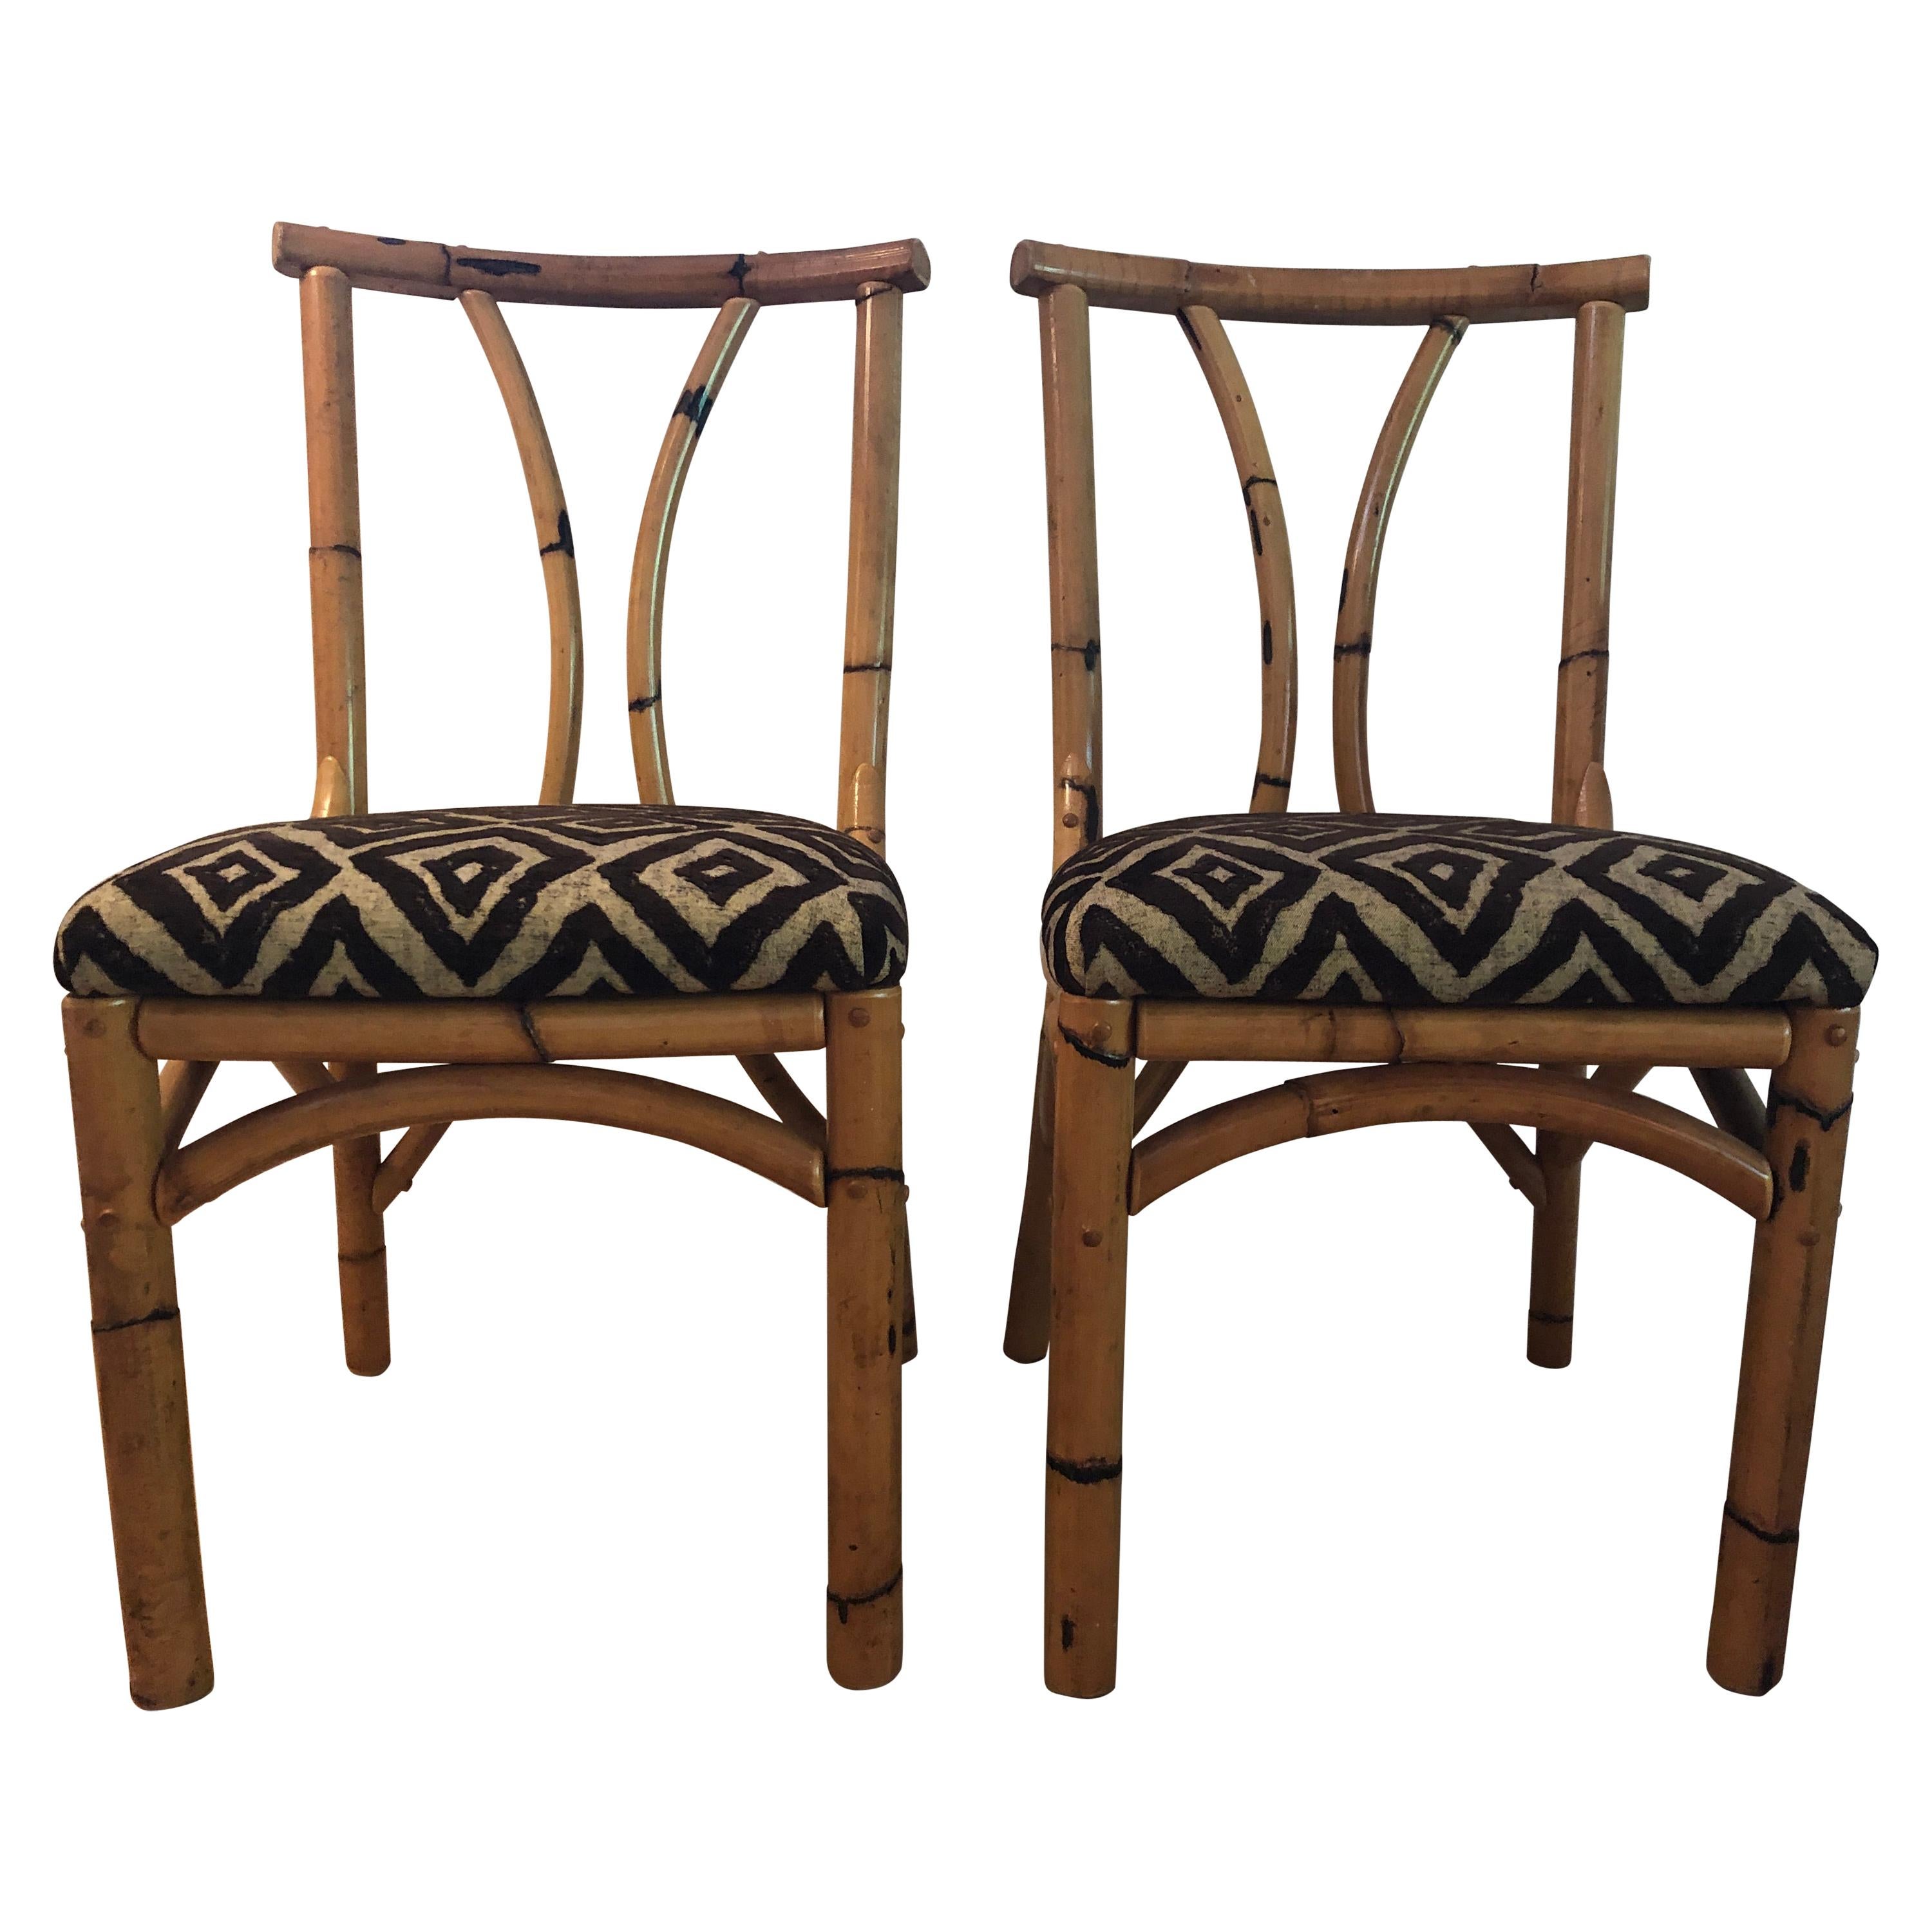 Pair of antique south seas bamboo chairs with polynesian hawaiian fabric For Sale